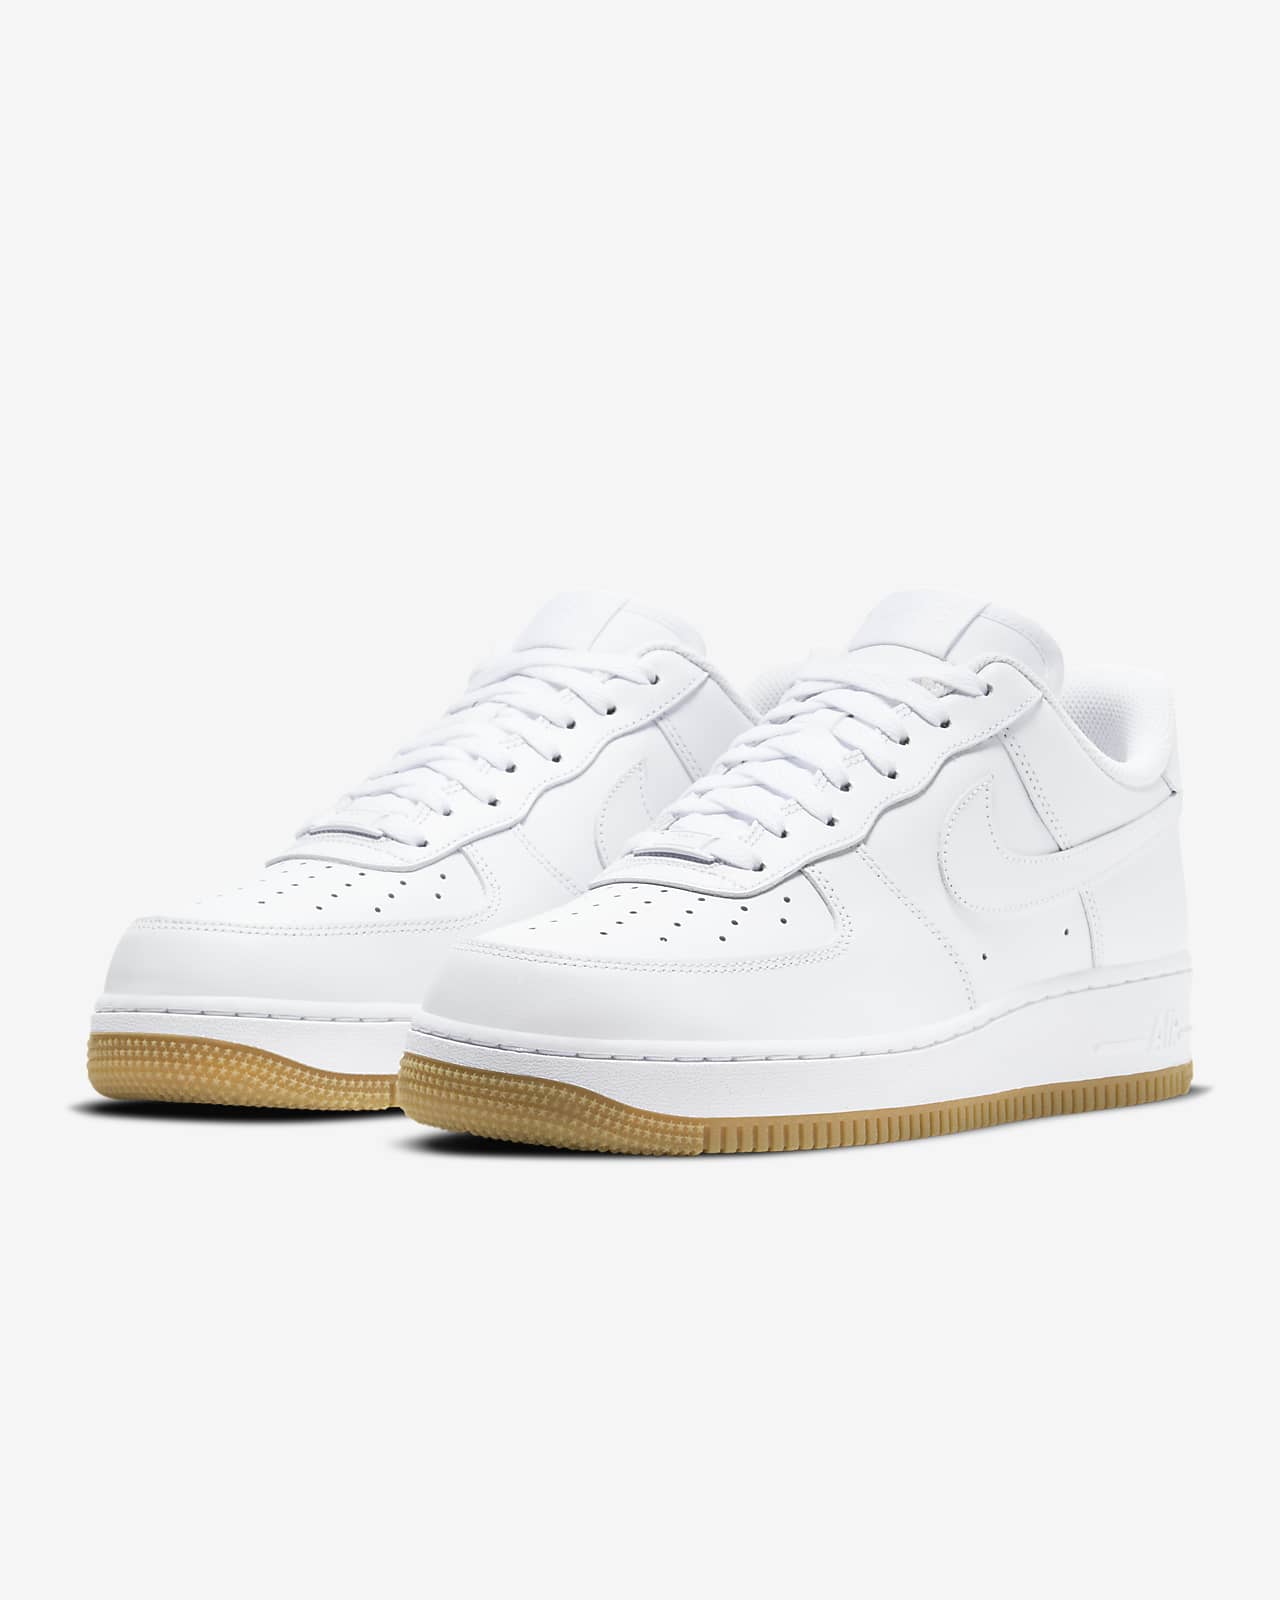 white and black air forces with gum bottoms